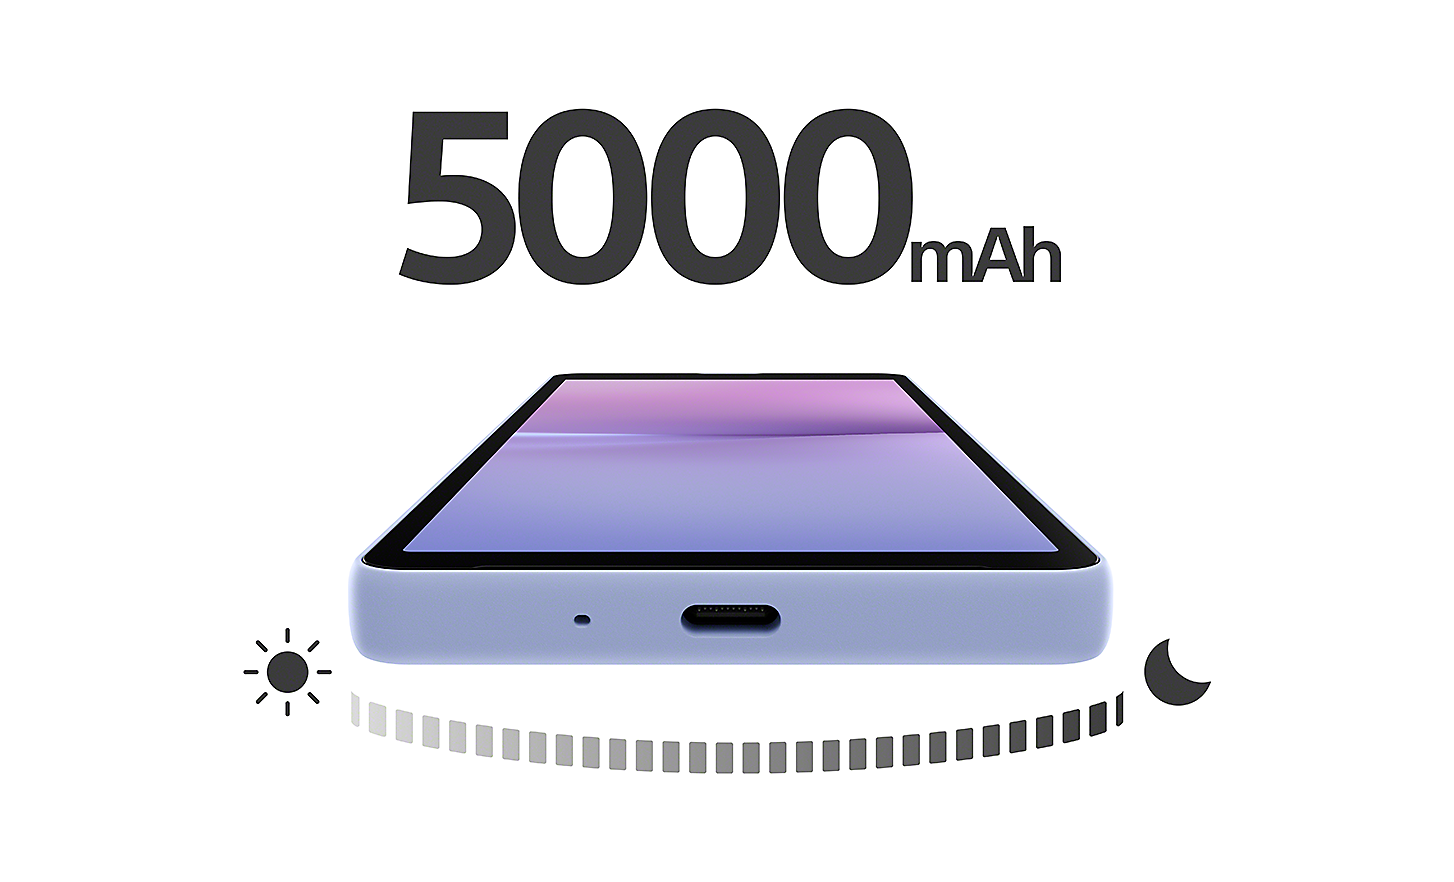 An Xperia 10 V in Lavender, laying flat. Above it, 5000mAh in large text. Below it, a day-to-night icon.